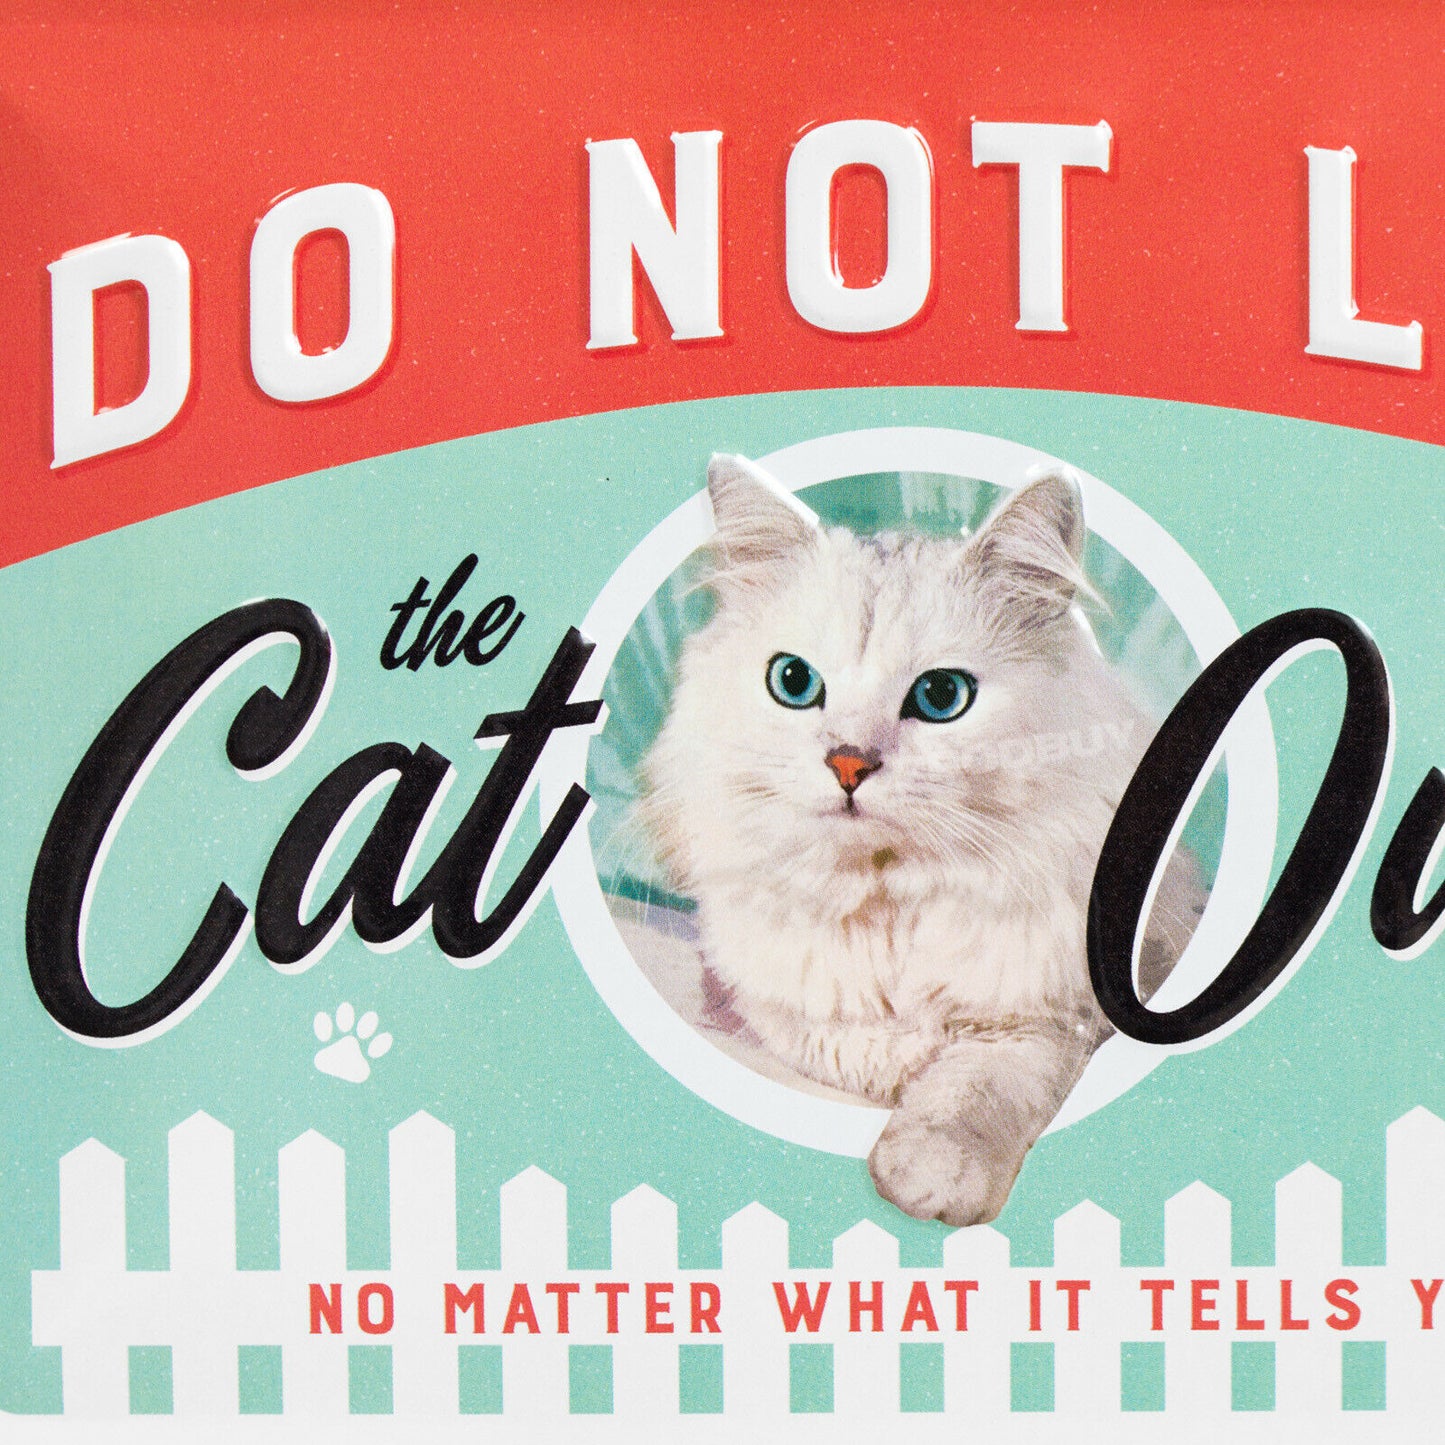 'Do Not Let The Cat Out' Metal 20cm Wall Sign